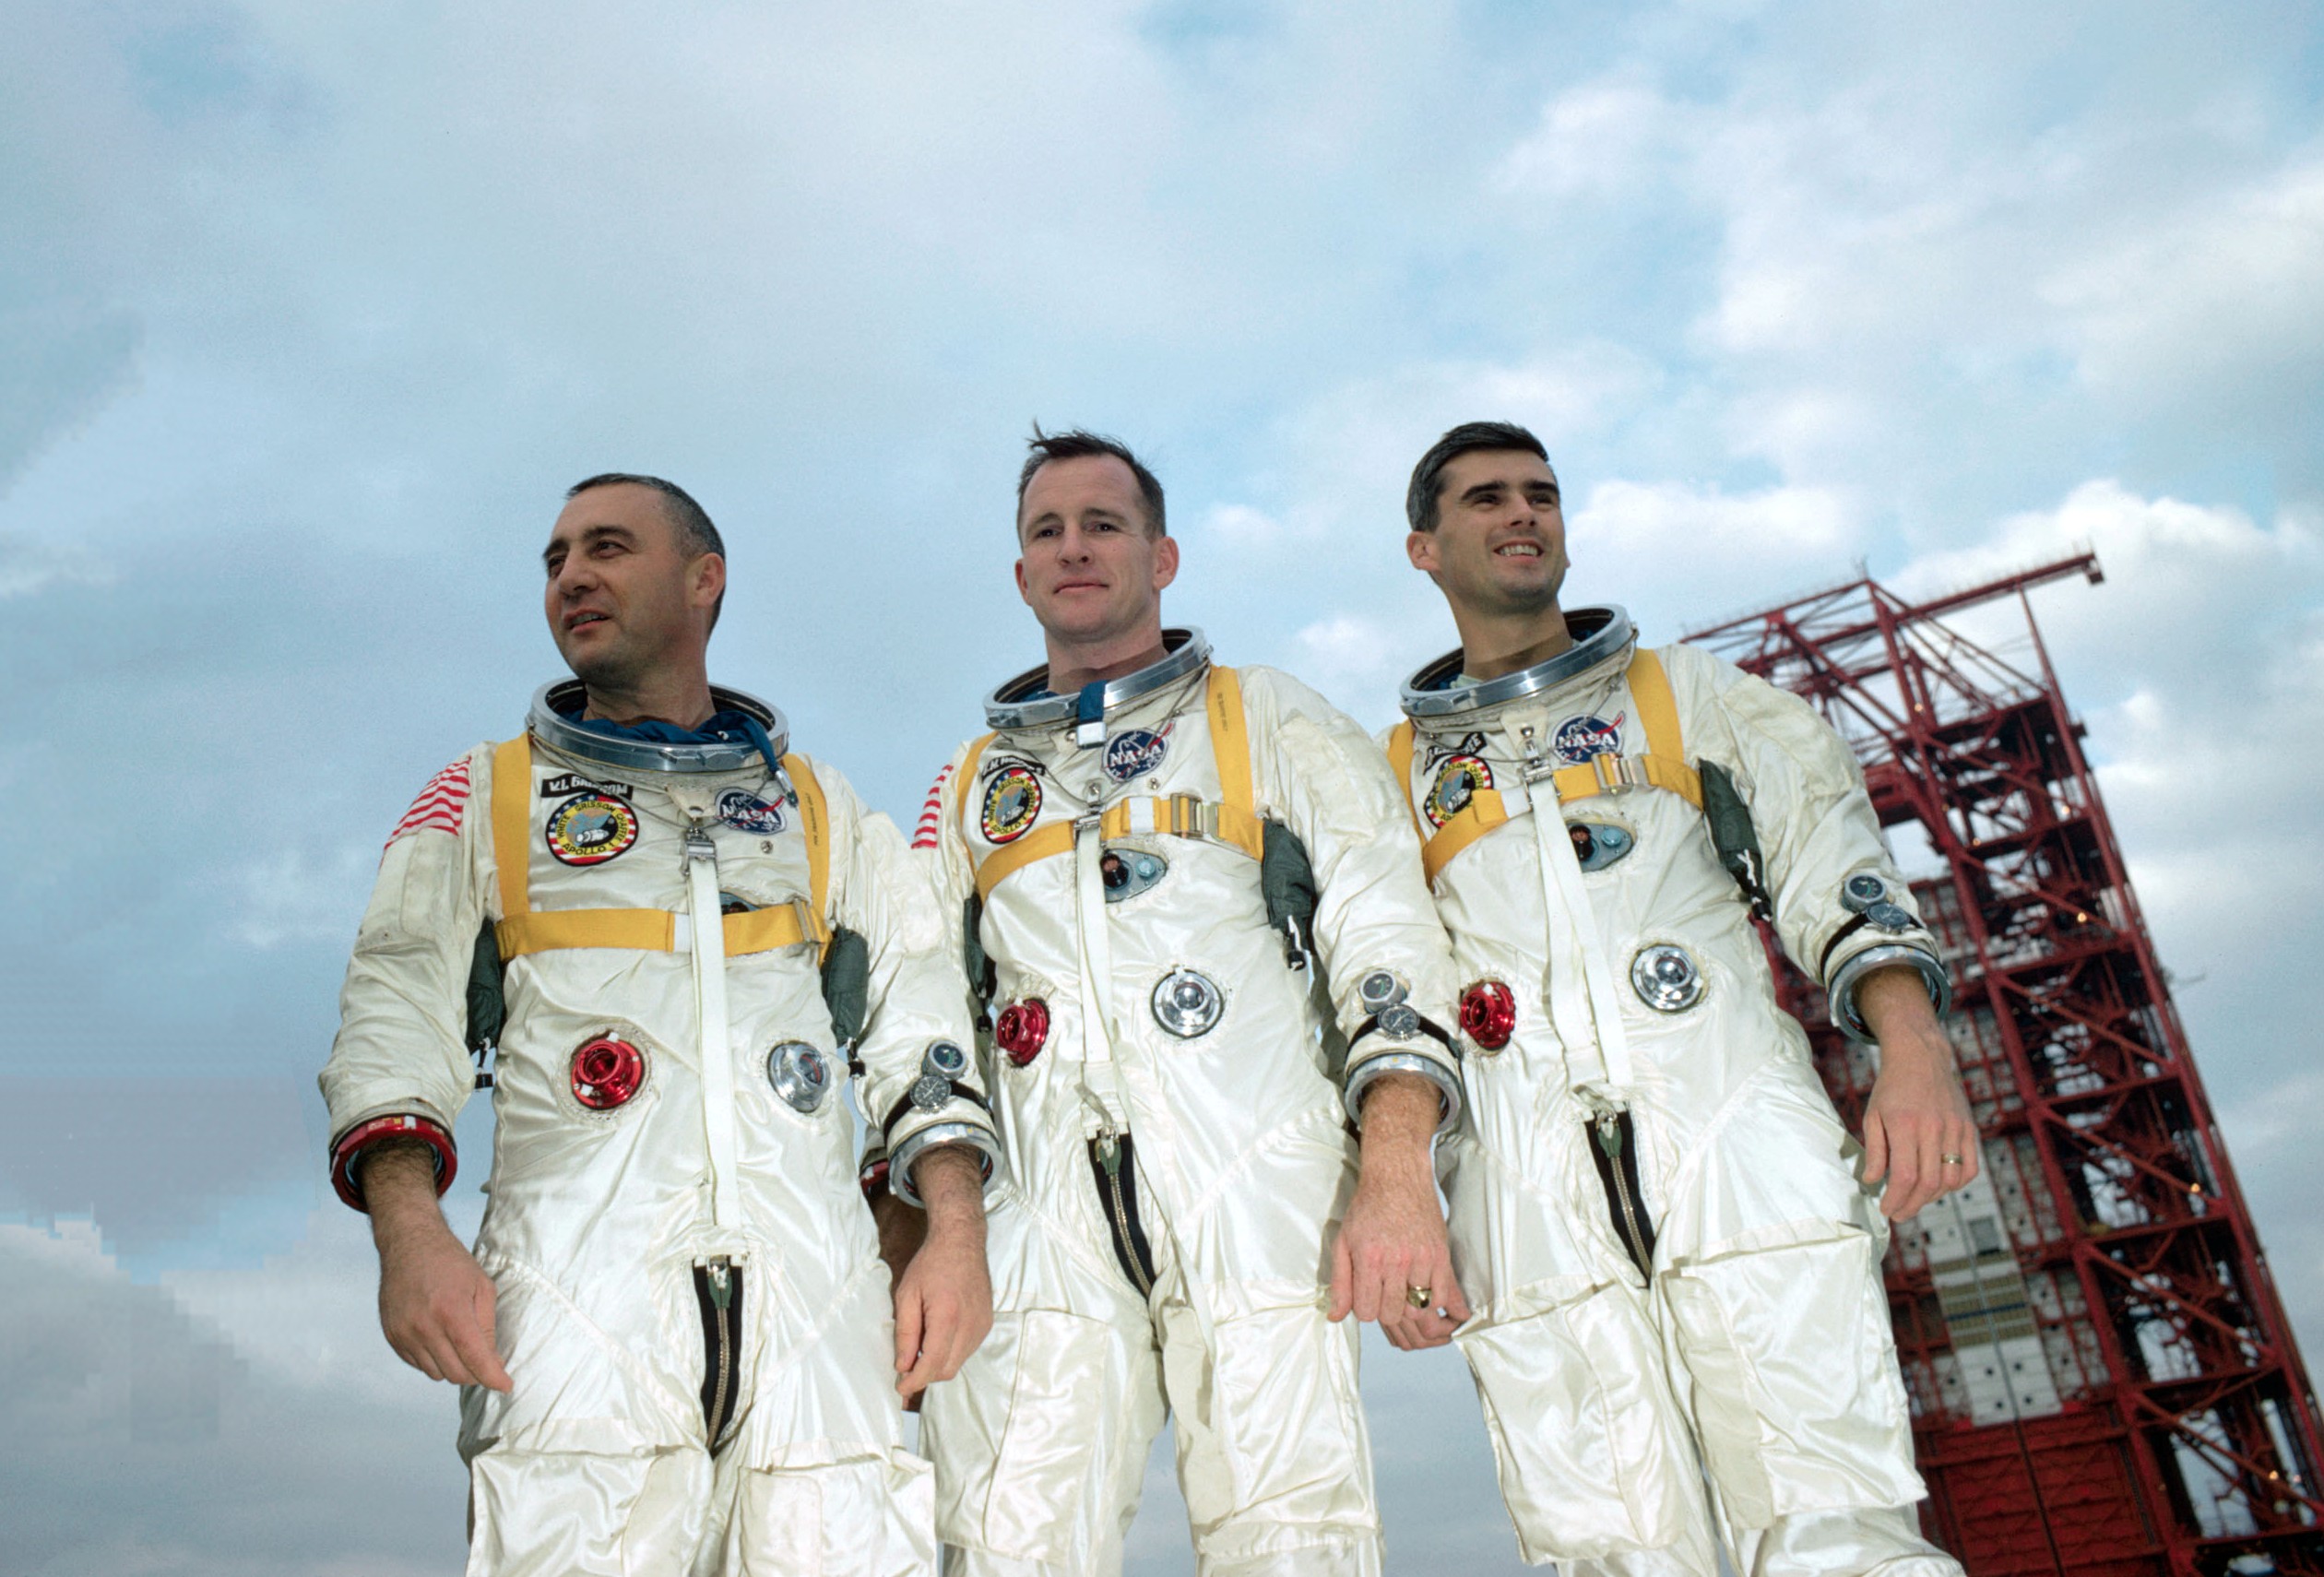 Apollo 1 astronauts Gus Grissom, Ed White and Roger Chaffee at Launch Complex 34 at Cape Canaveral, Fla. on January 19, 1967.